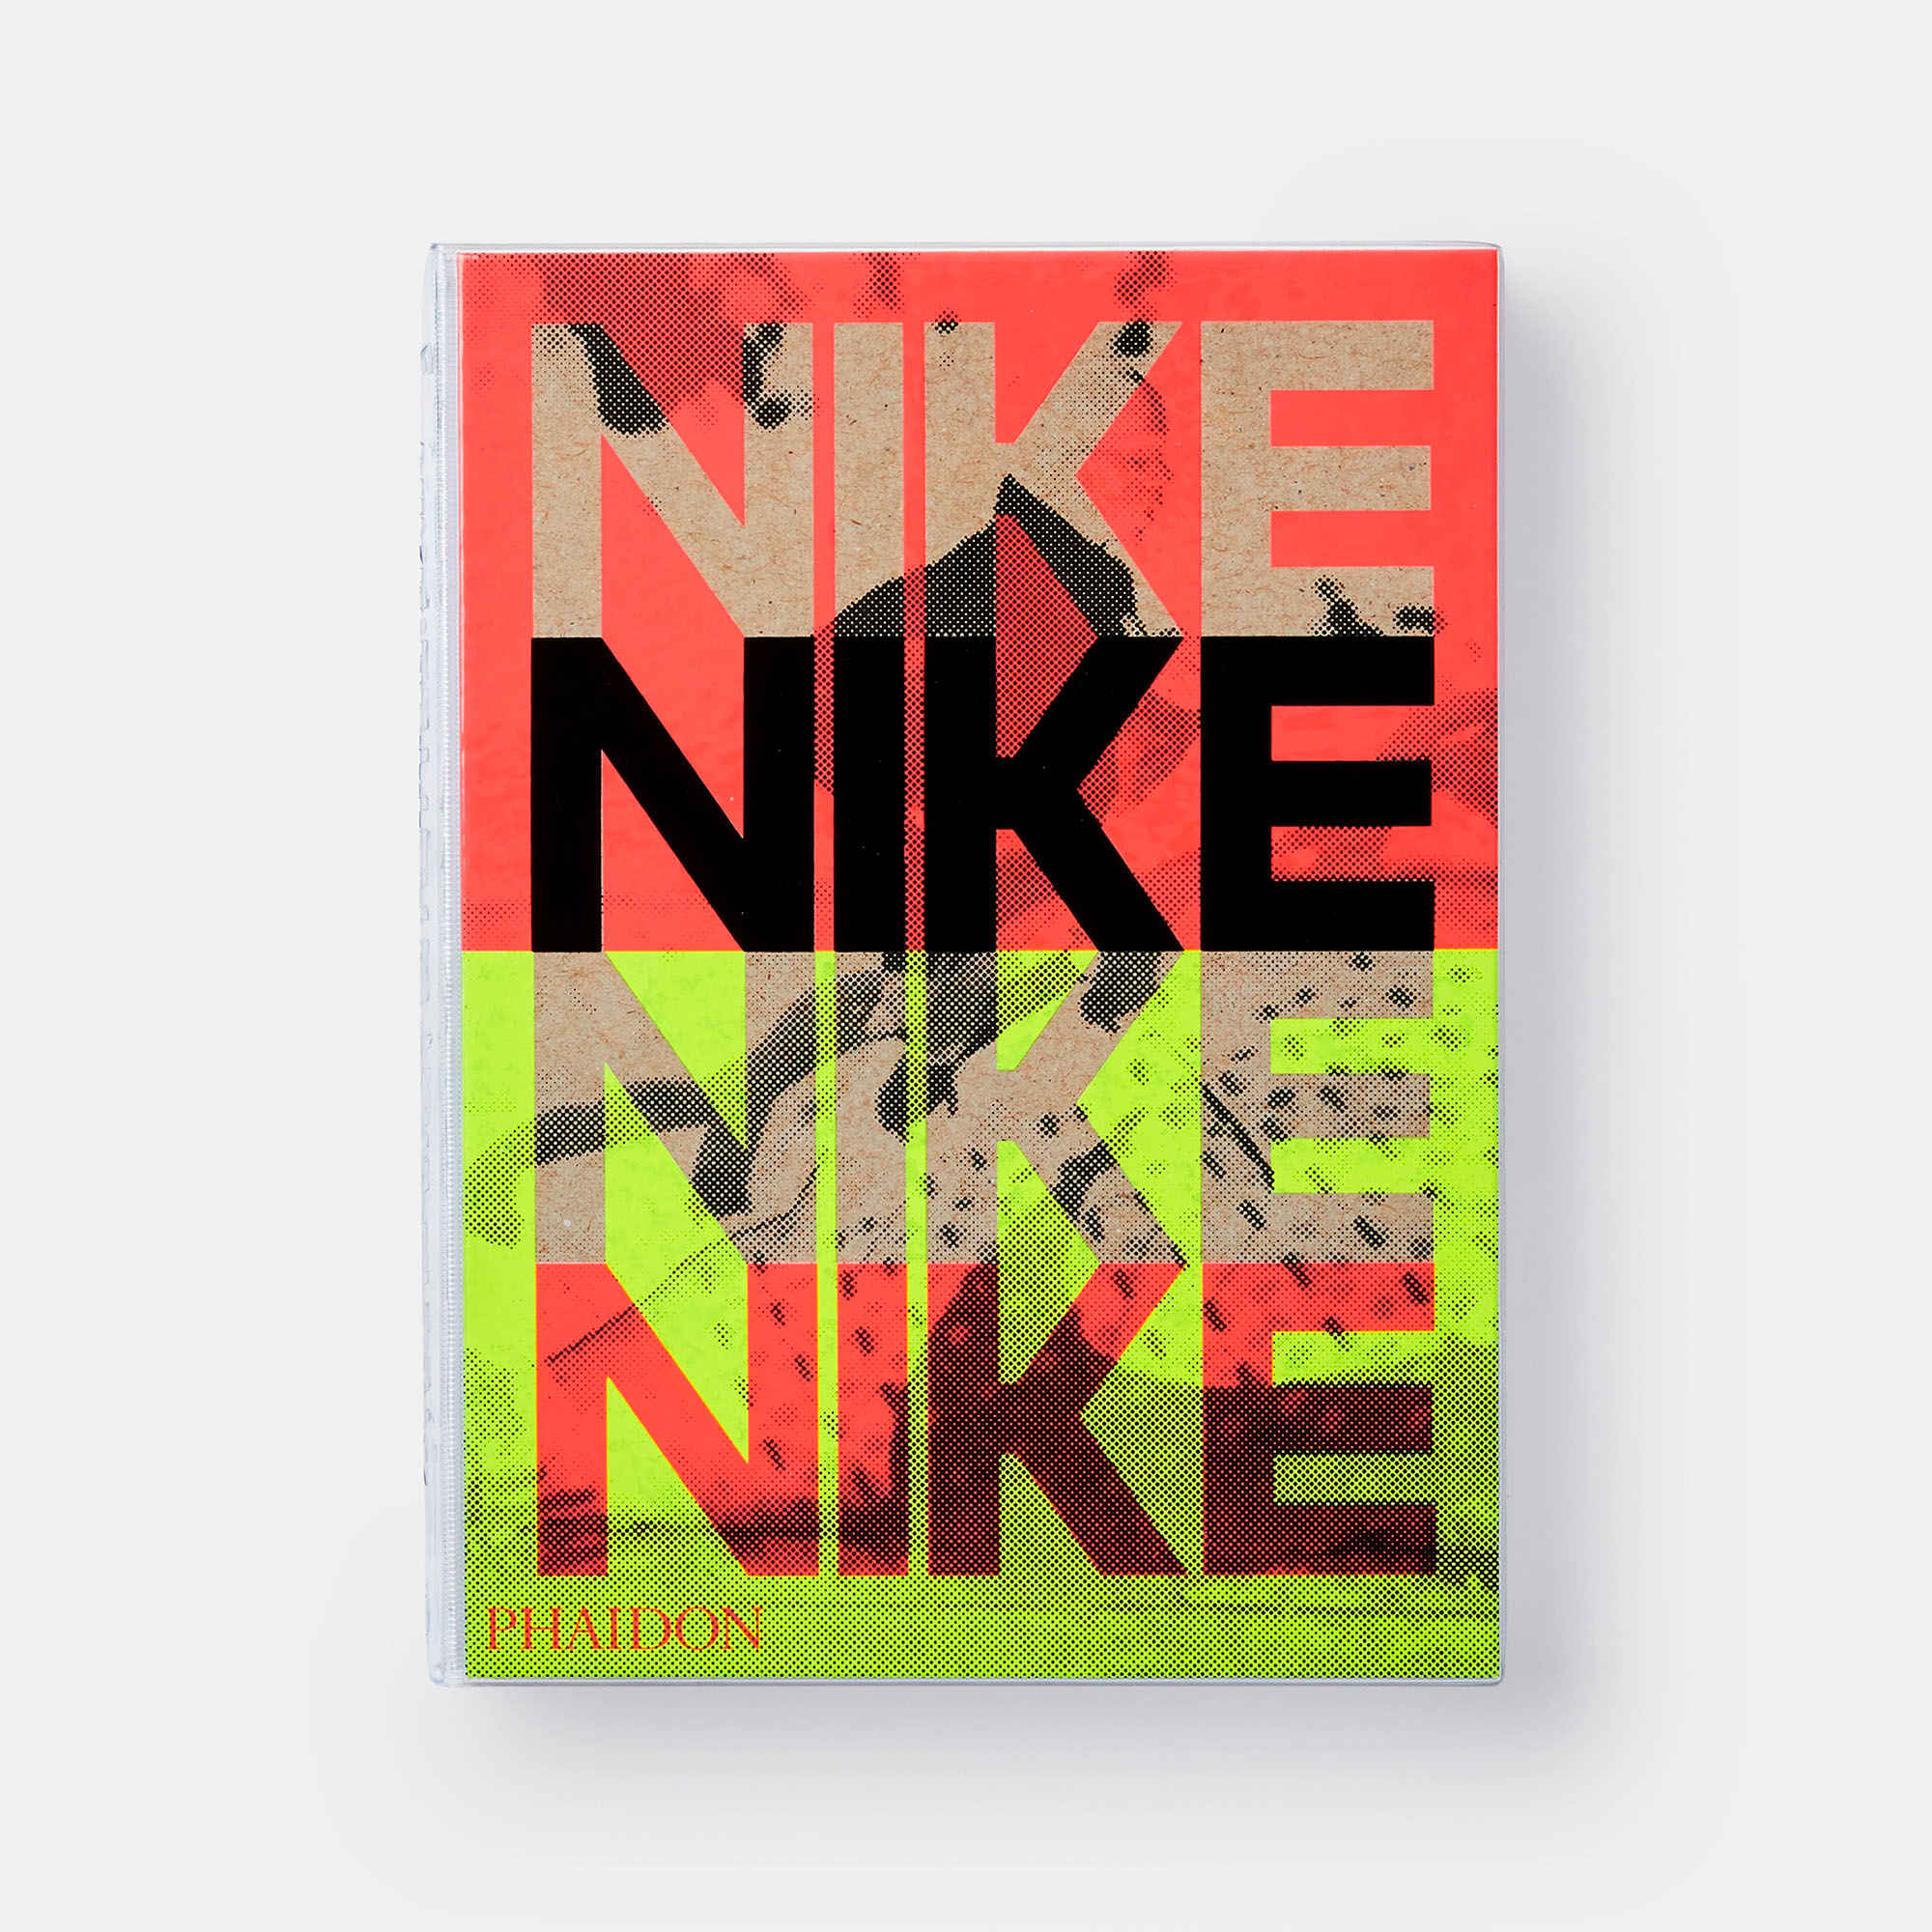 Nike better is temporary book published by Phaidon